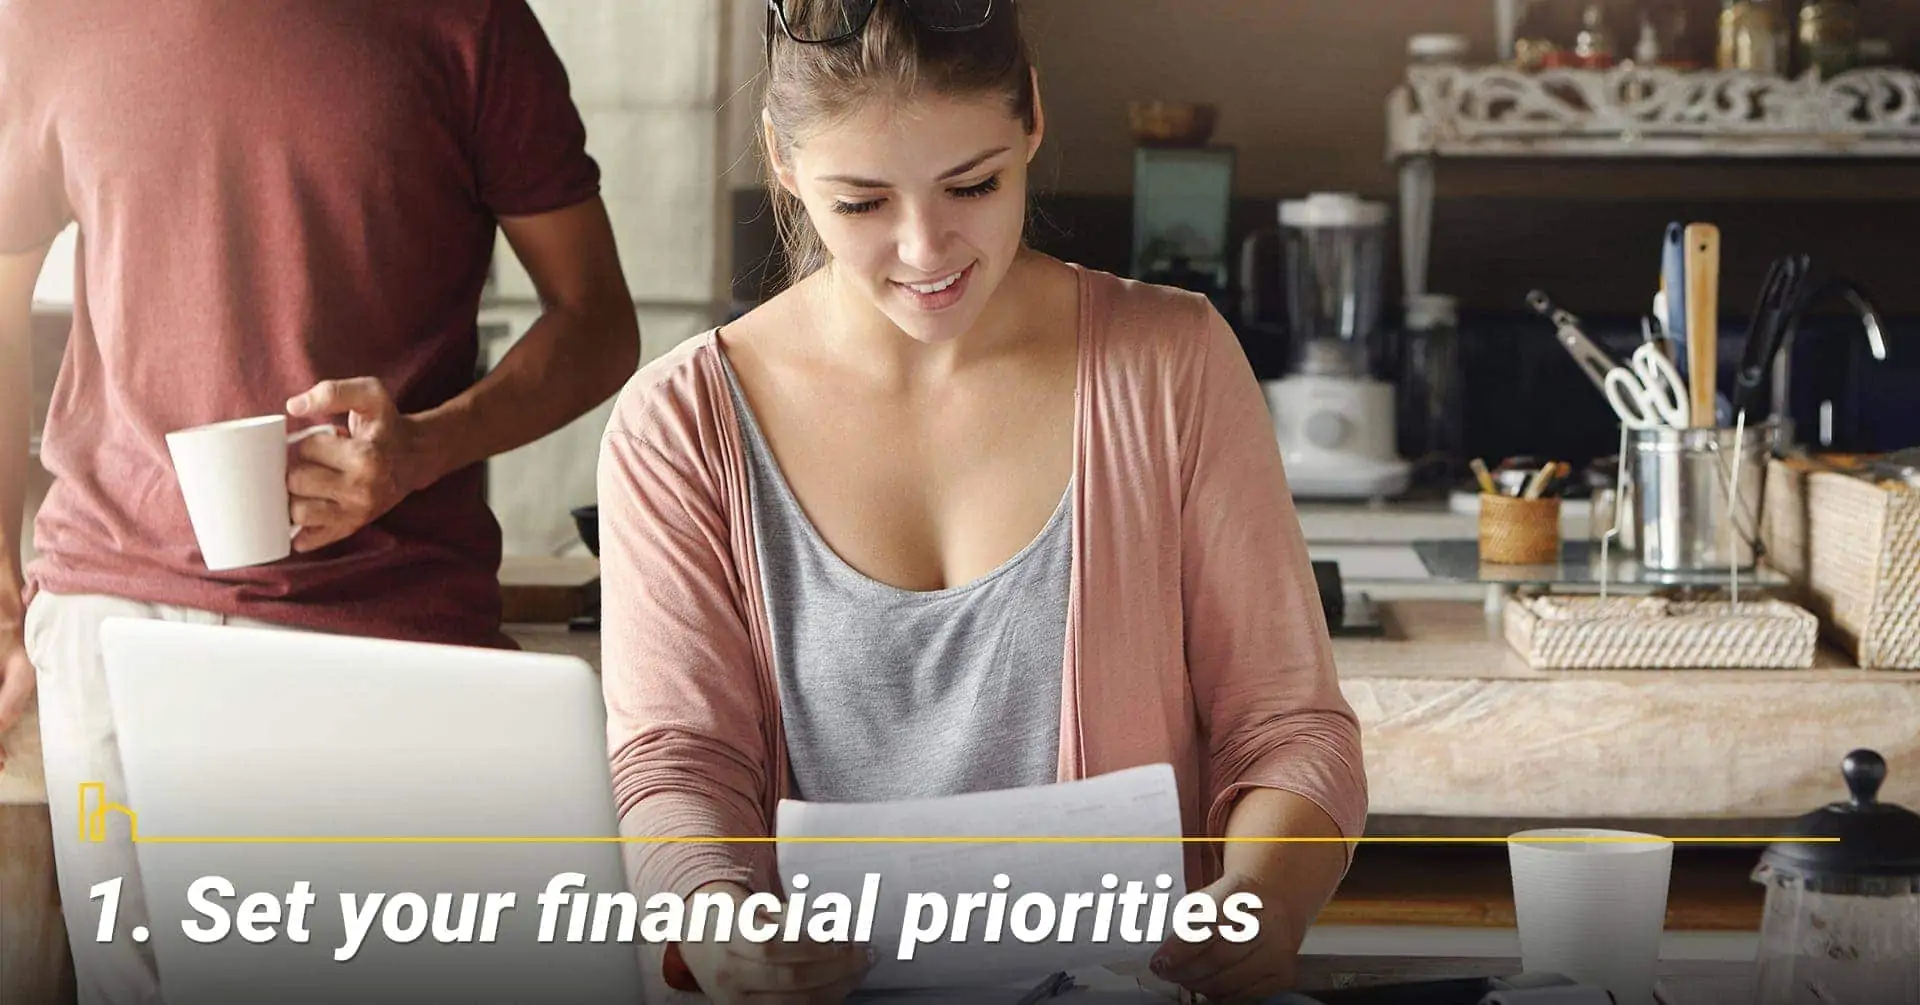 Set your financial priorities, keep your finances straight